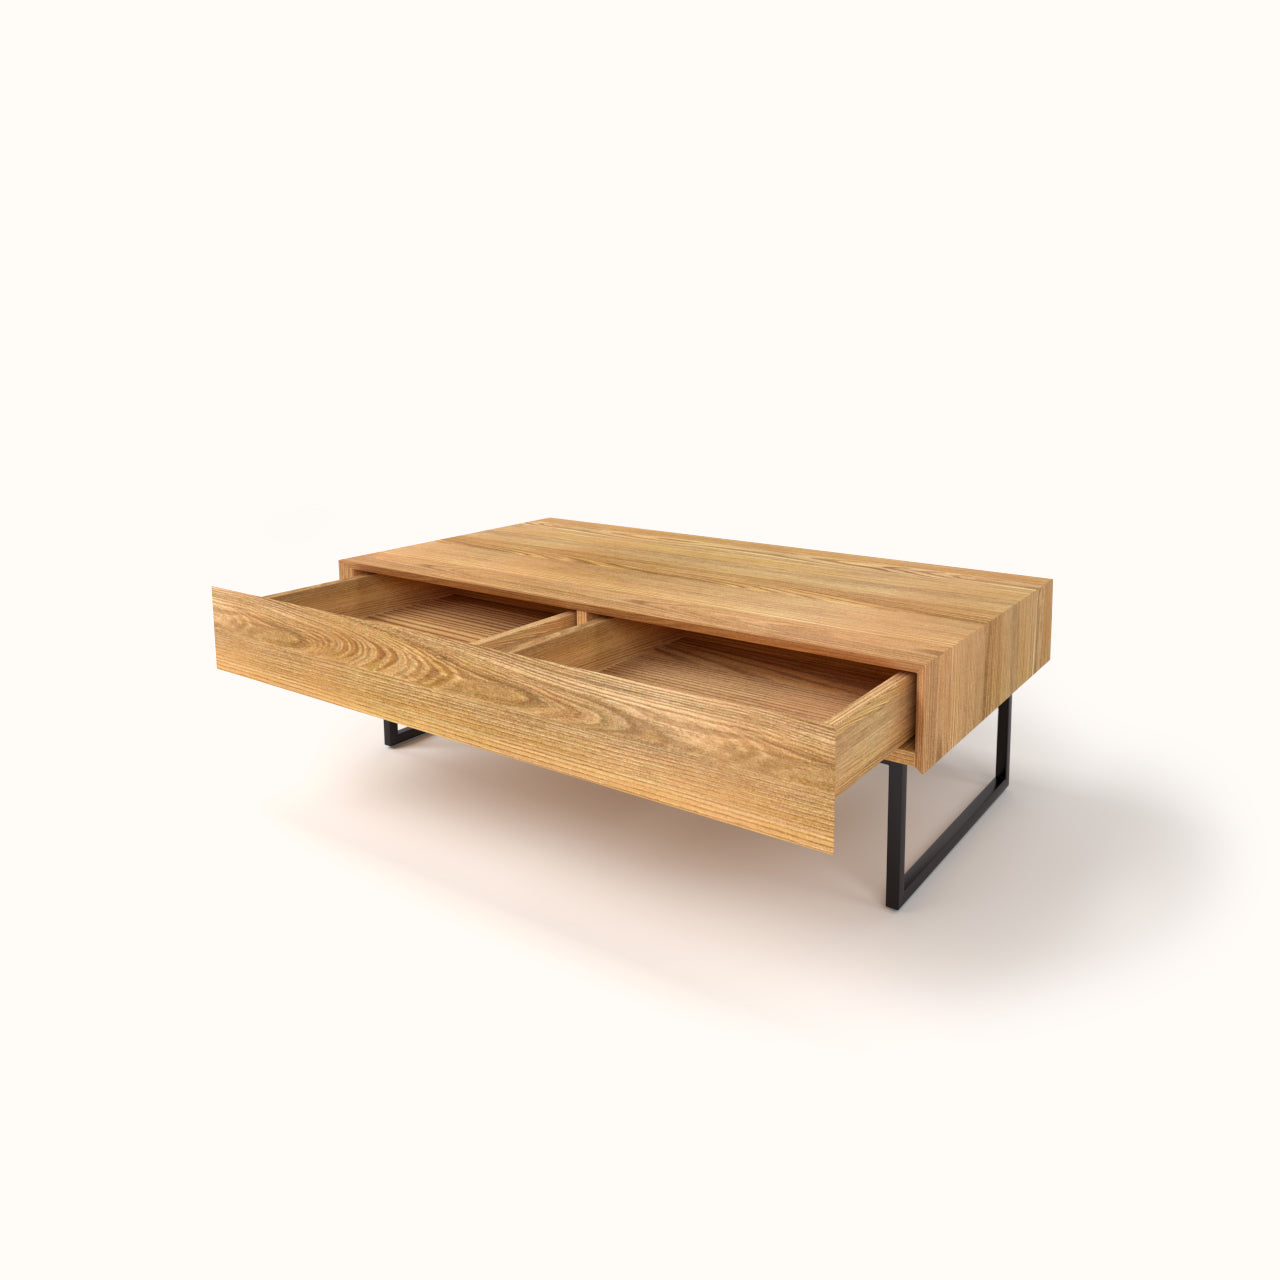 Soild wood coffee table with drawers